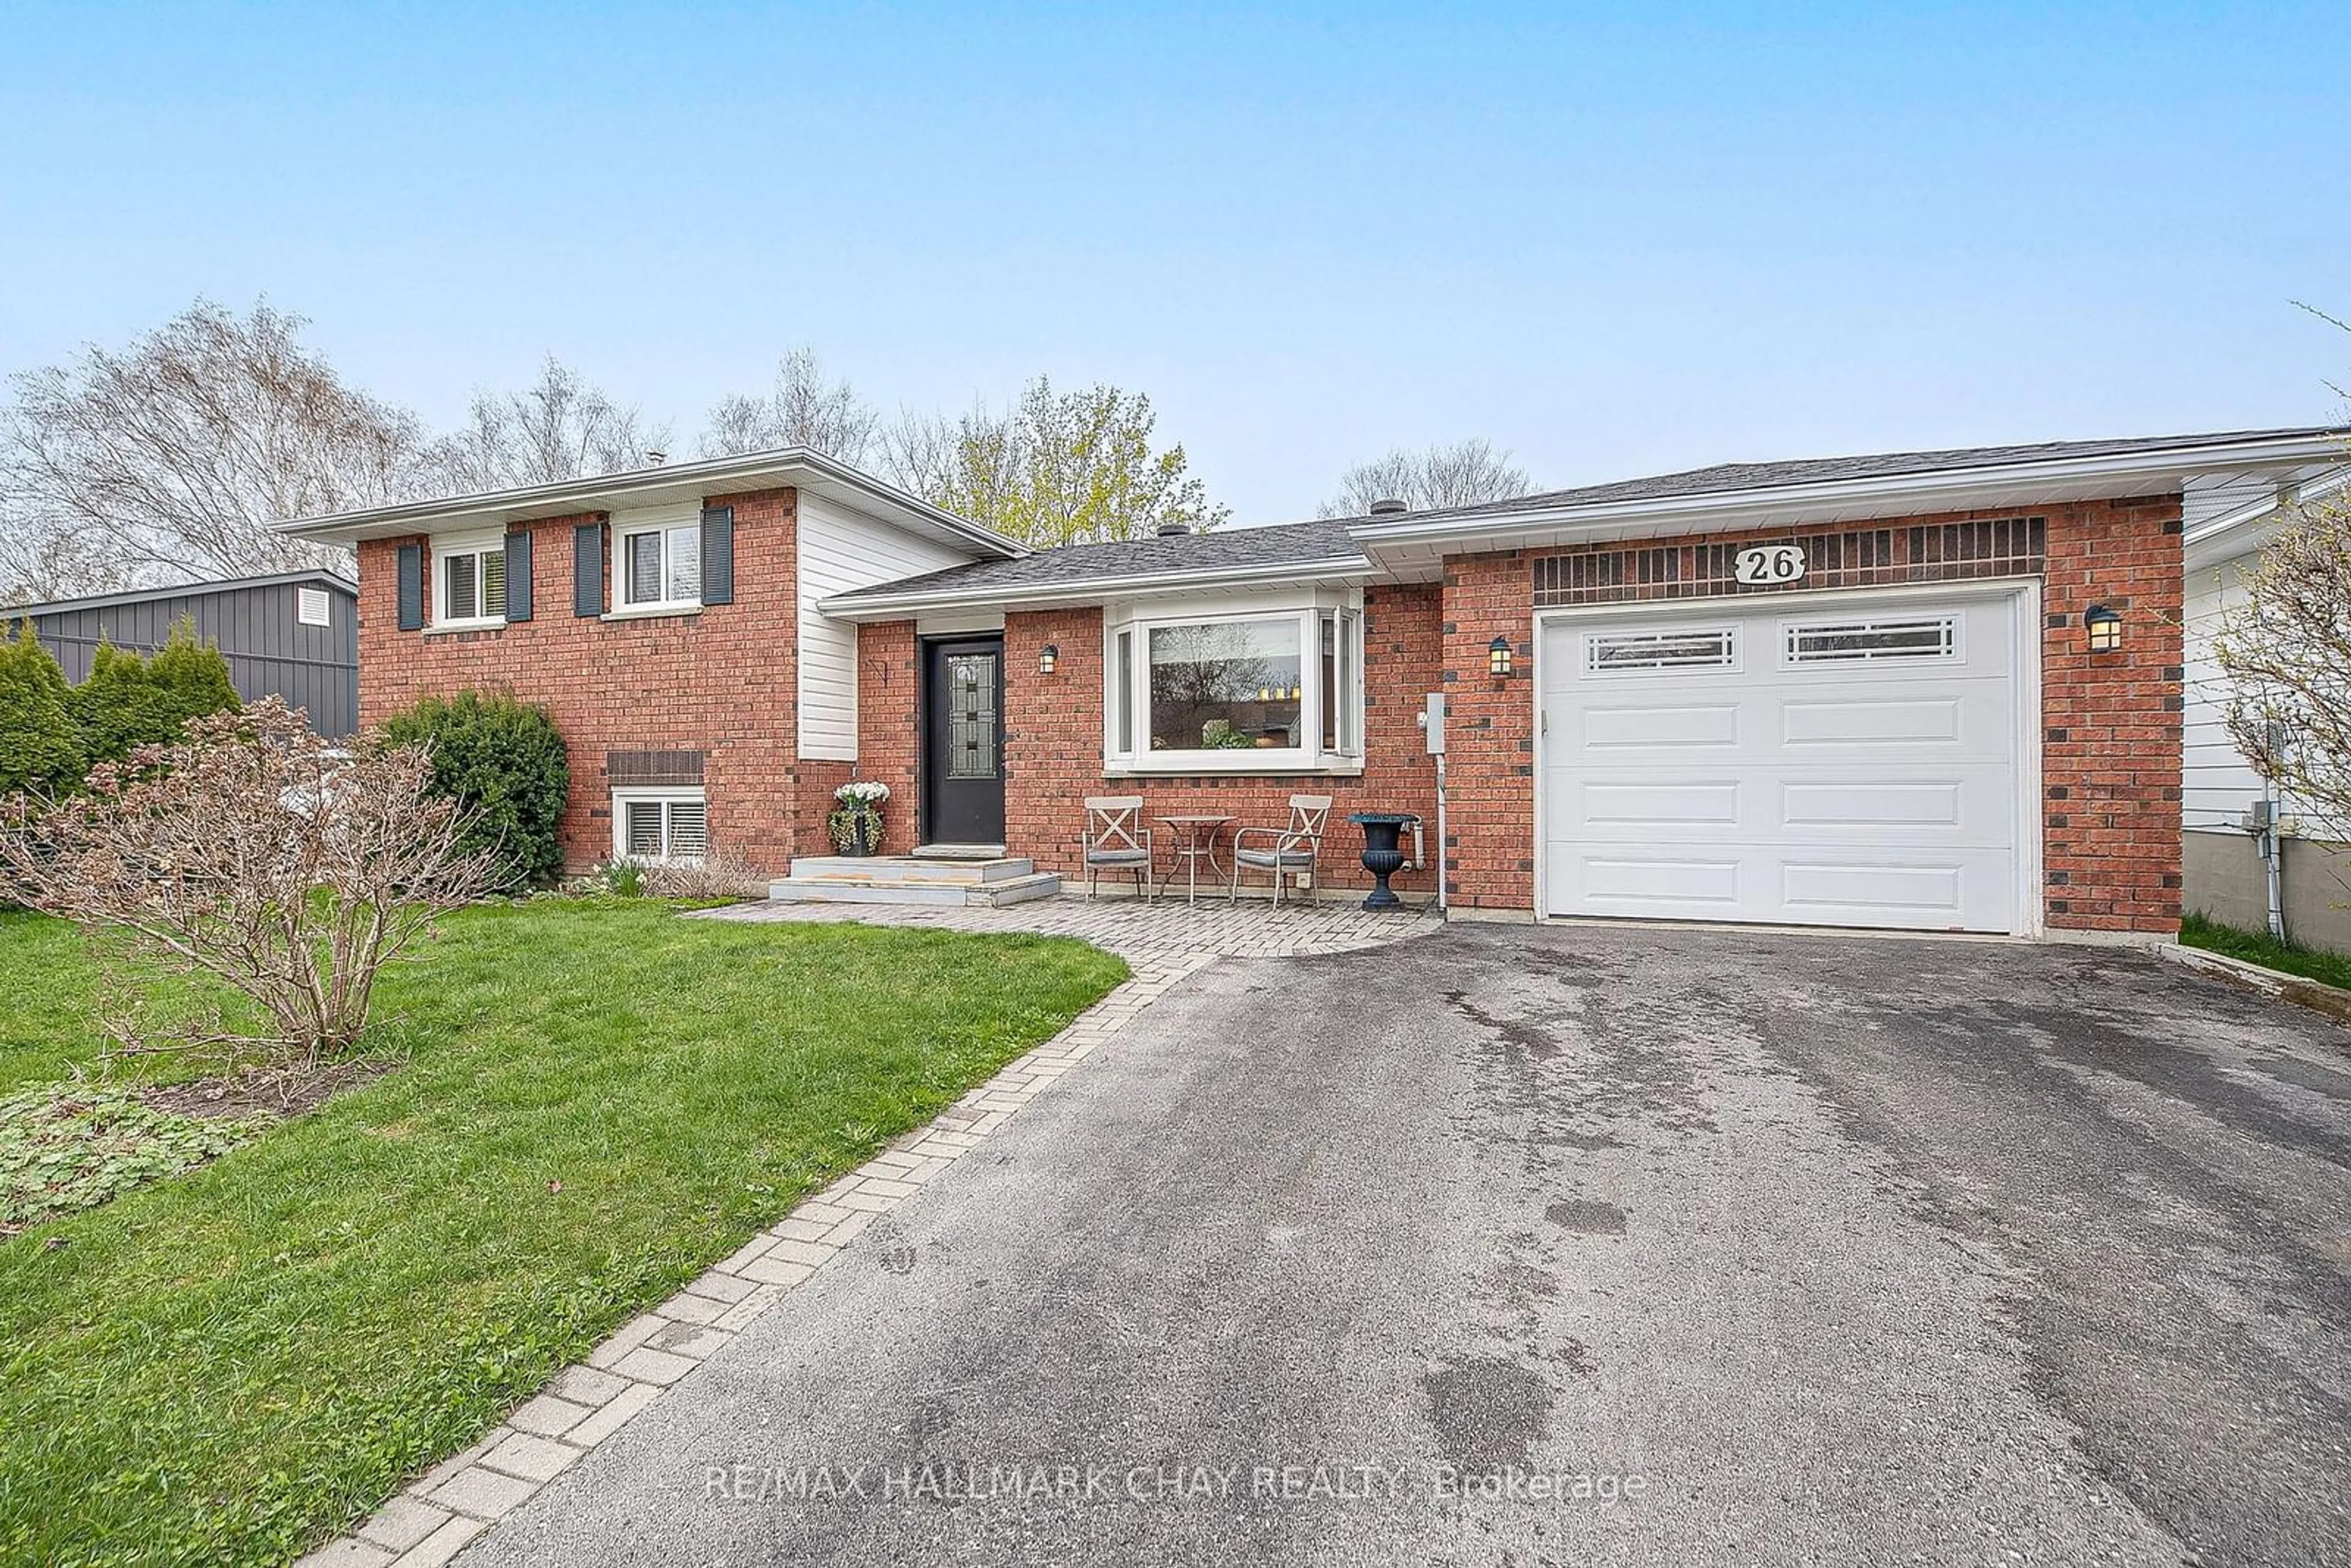 Home with brick exterior material for 26 Centennial Ave, Springwater Ontario L0L 1P0